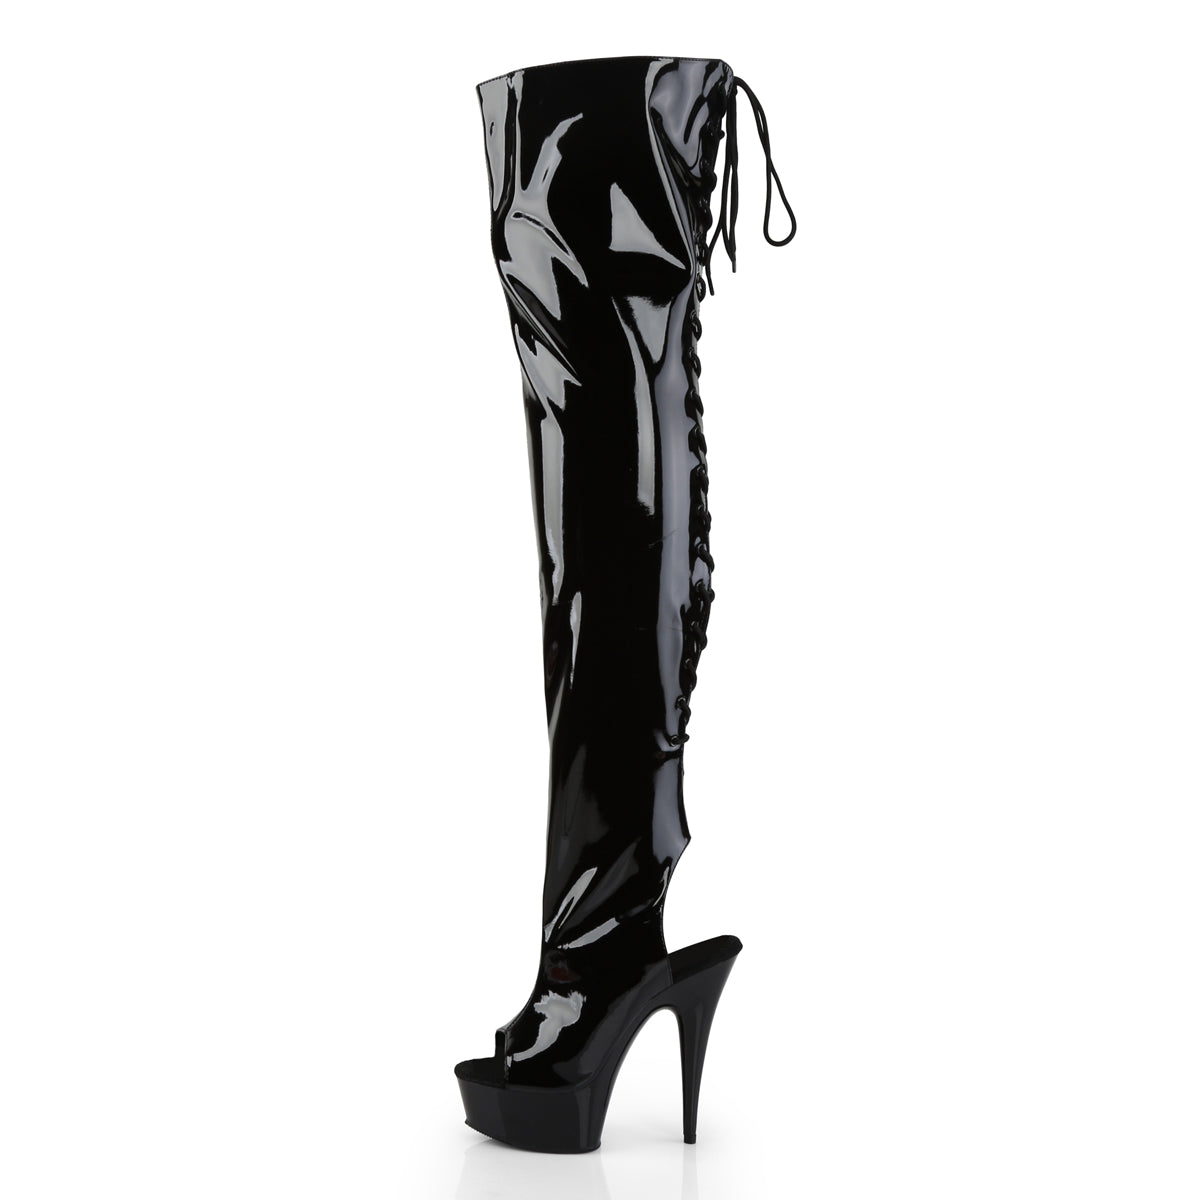 DELIGHT-3017 6" Heel Black Stretch Patent Pole Dancer Boots-Pleaser- Sexy Shoes Pole Dance Heels